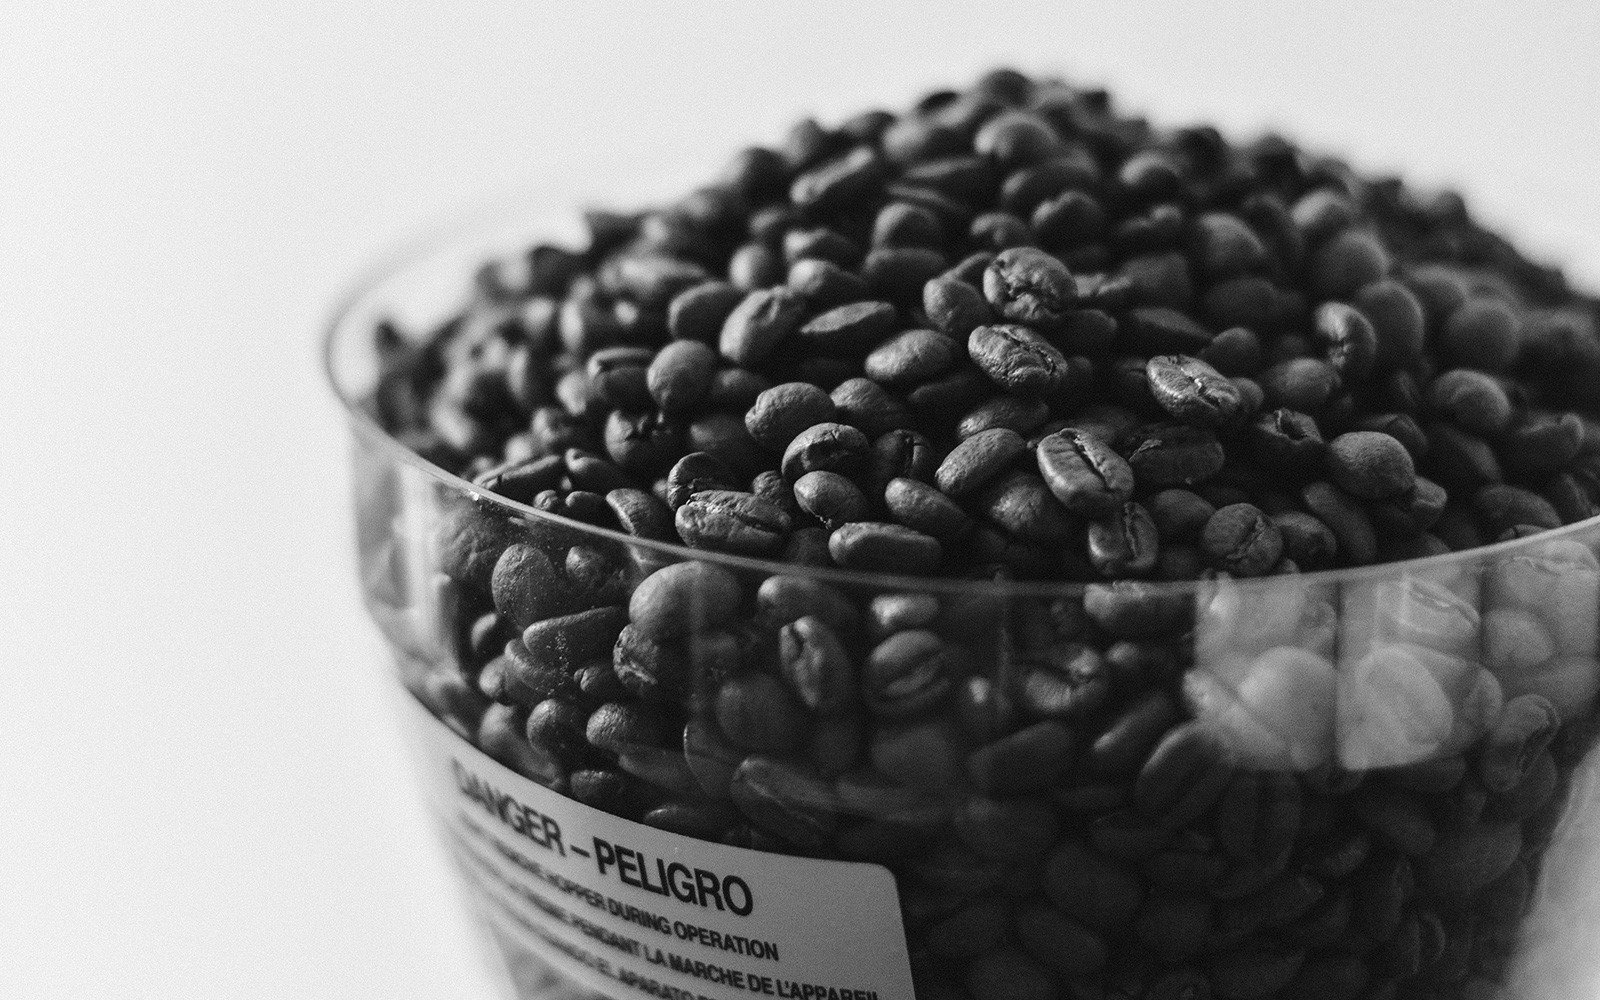 coffee beans in a glass bowl